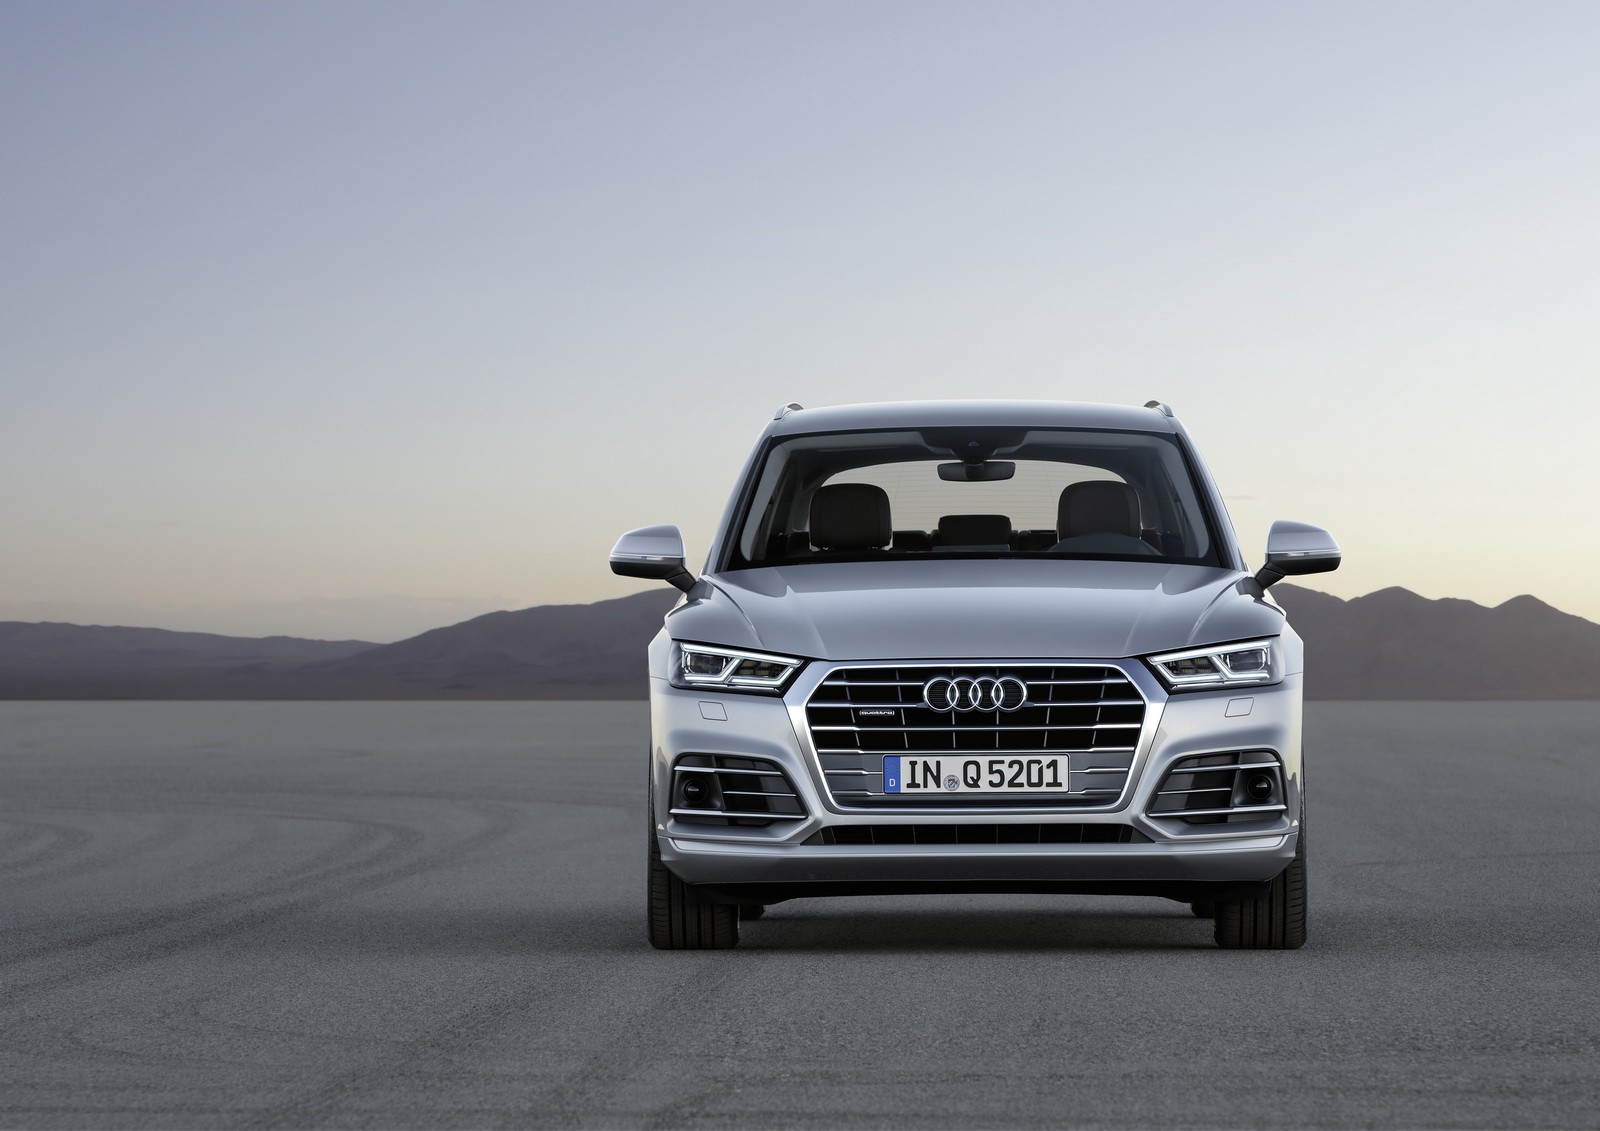 2017 Audi Q5 2.0 TDI 190 PS Subjected to 0 to 100 KM/H Acceleration ...